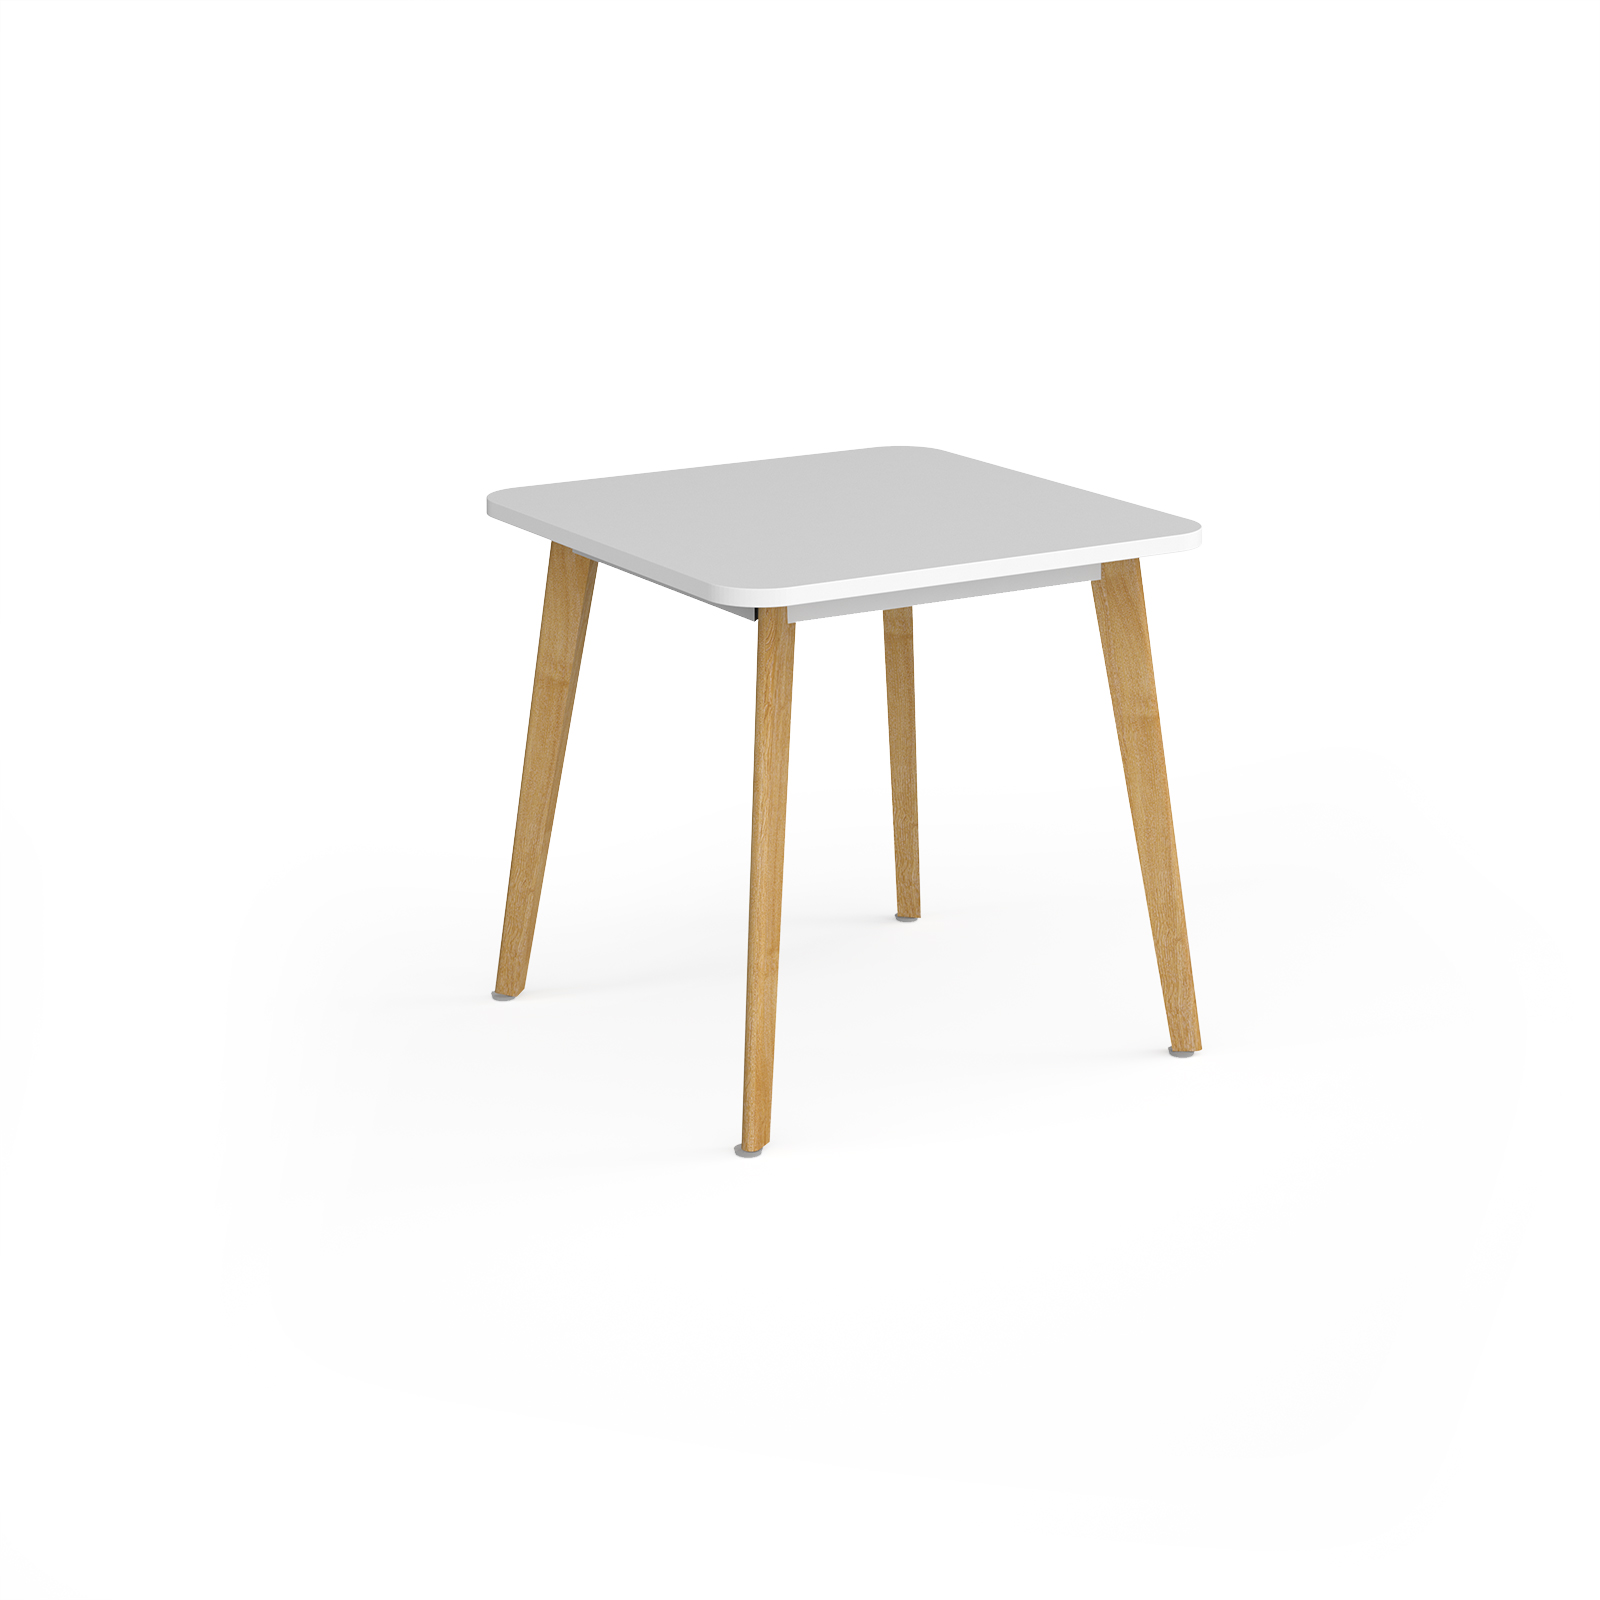 Como square dining table with 4 oak legs 800mm - white